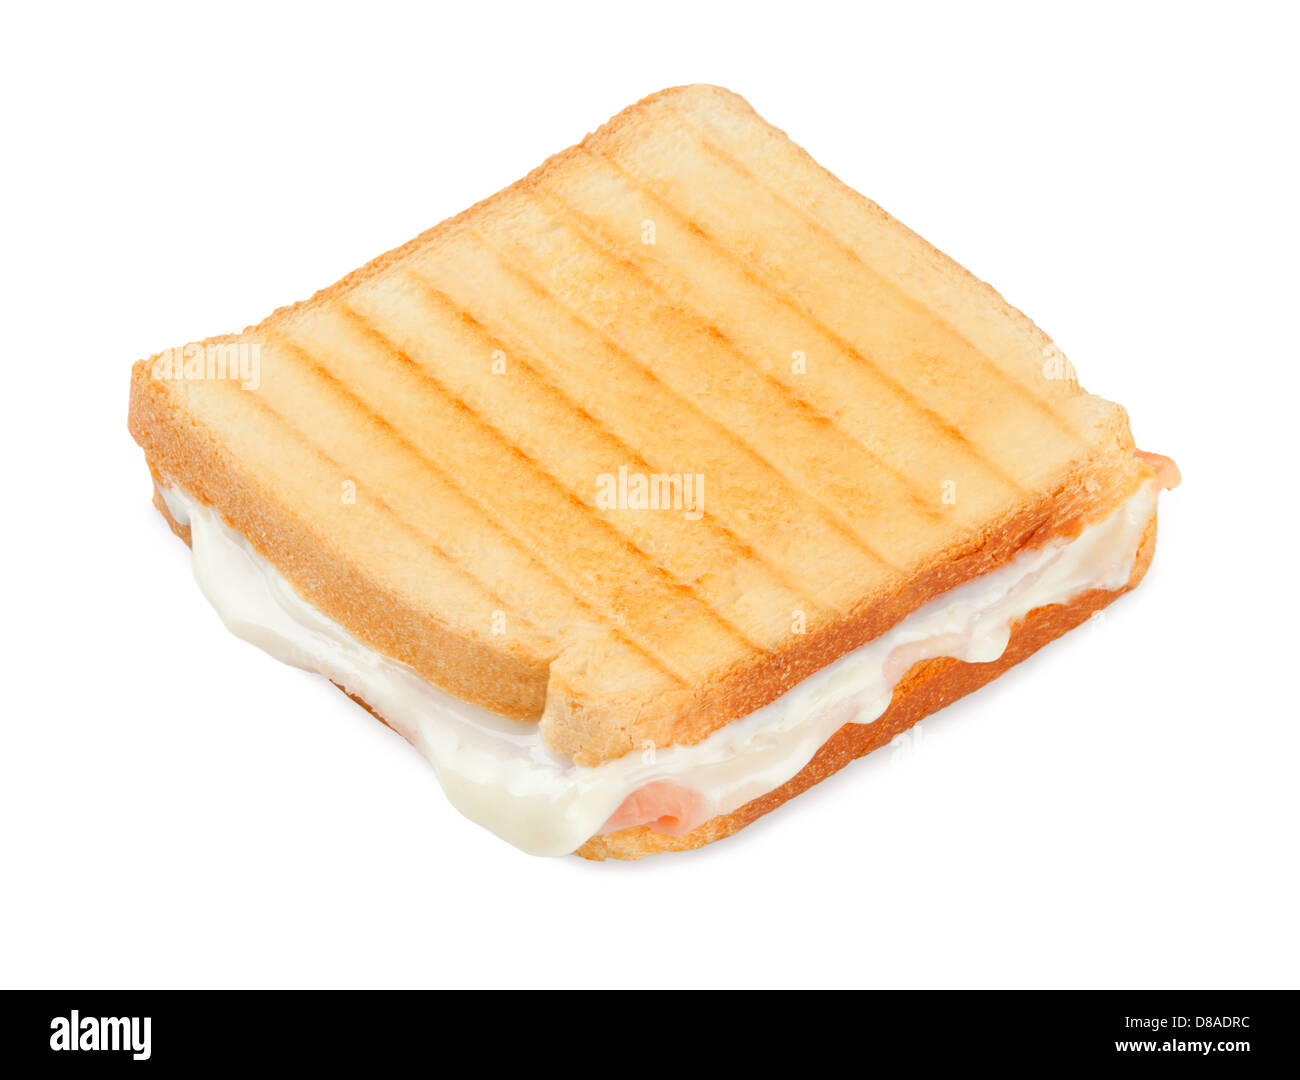 Toasted sandwich with ham and cheese on white background Stock Photo